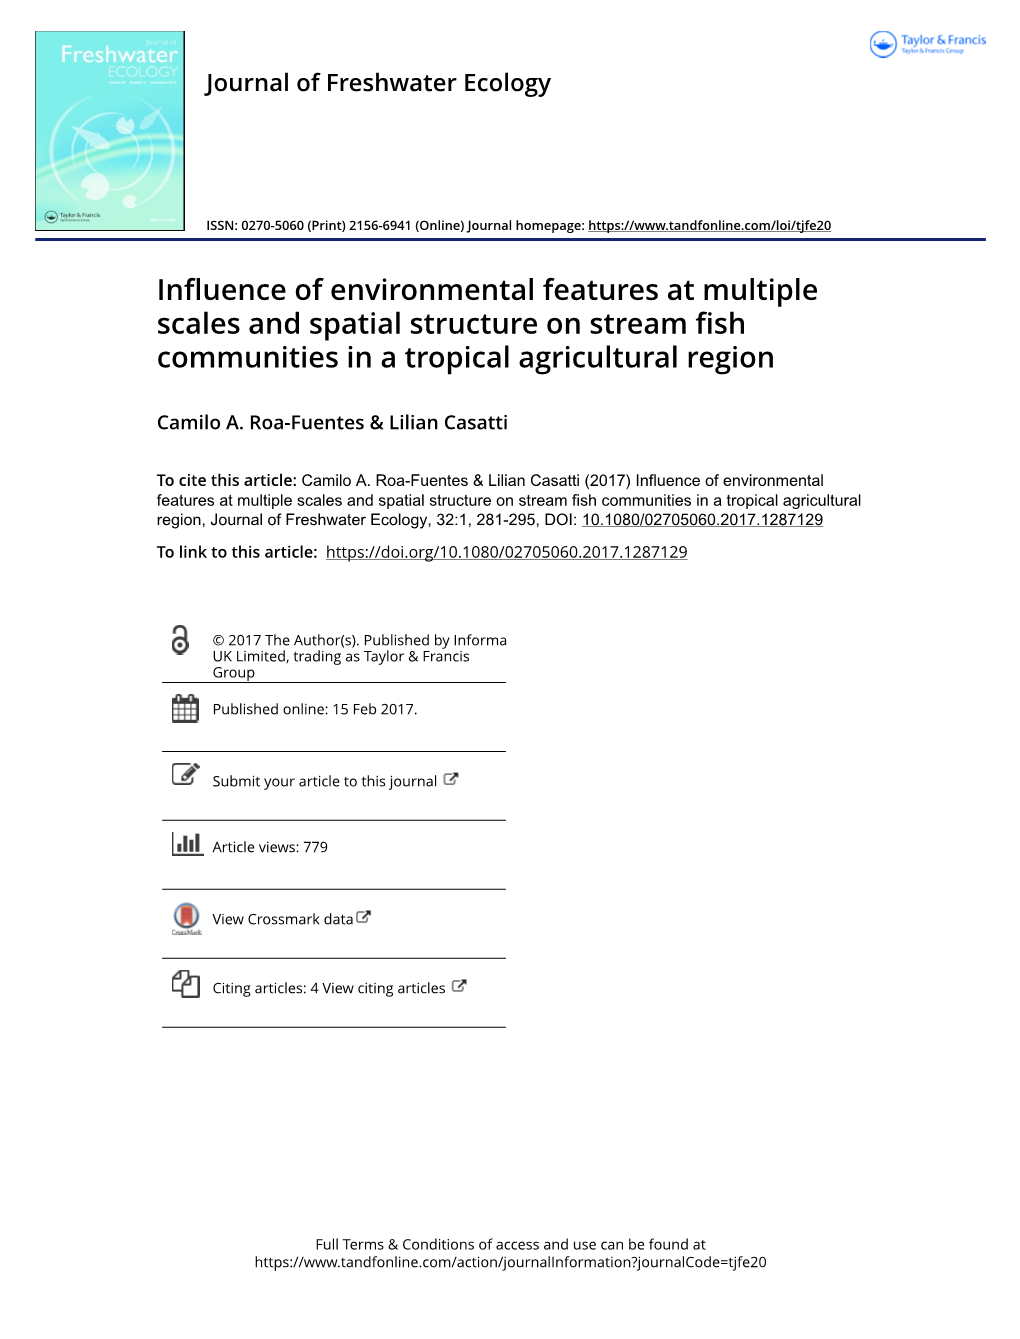 Influence of Environmental Features at Multiple Scales and Spatial Structure on Stream Fish Communities in a Tropical Agricultural Region